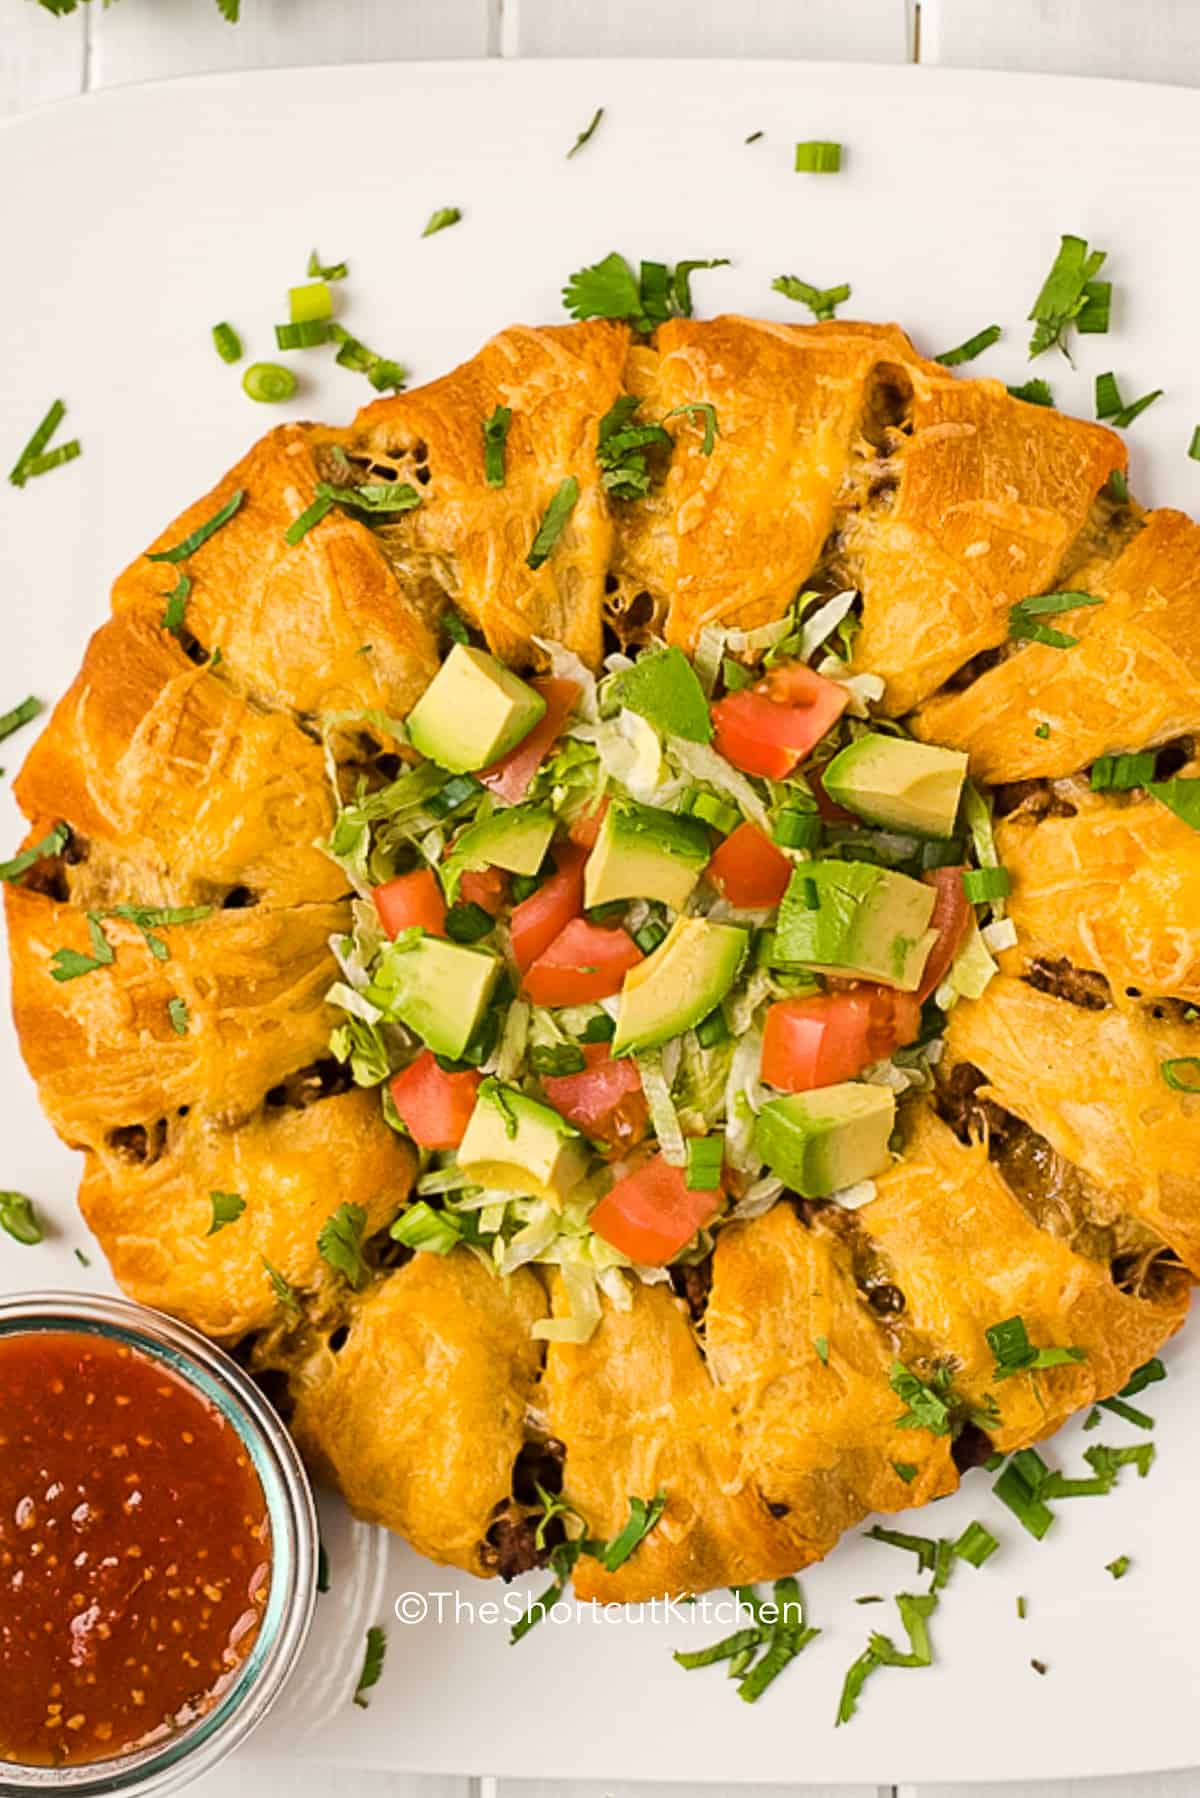 baked taco ring with taco toppings served in the center